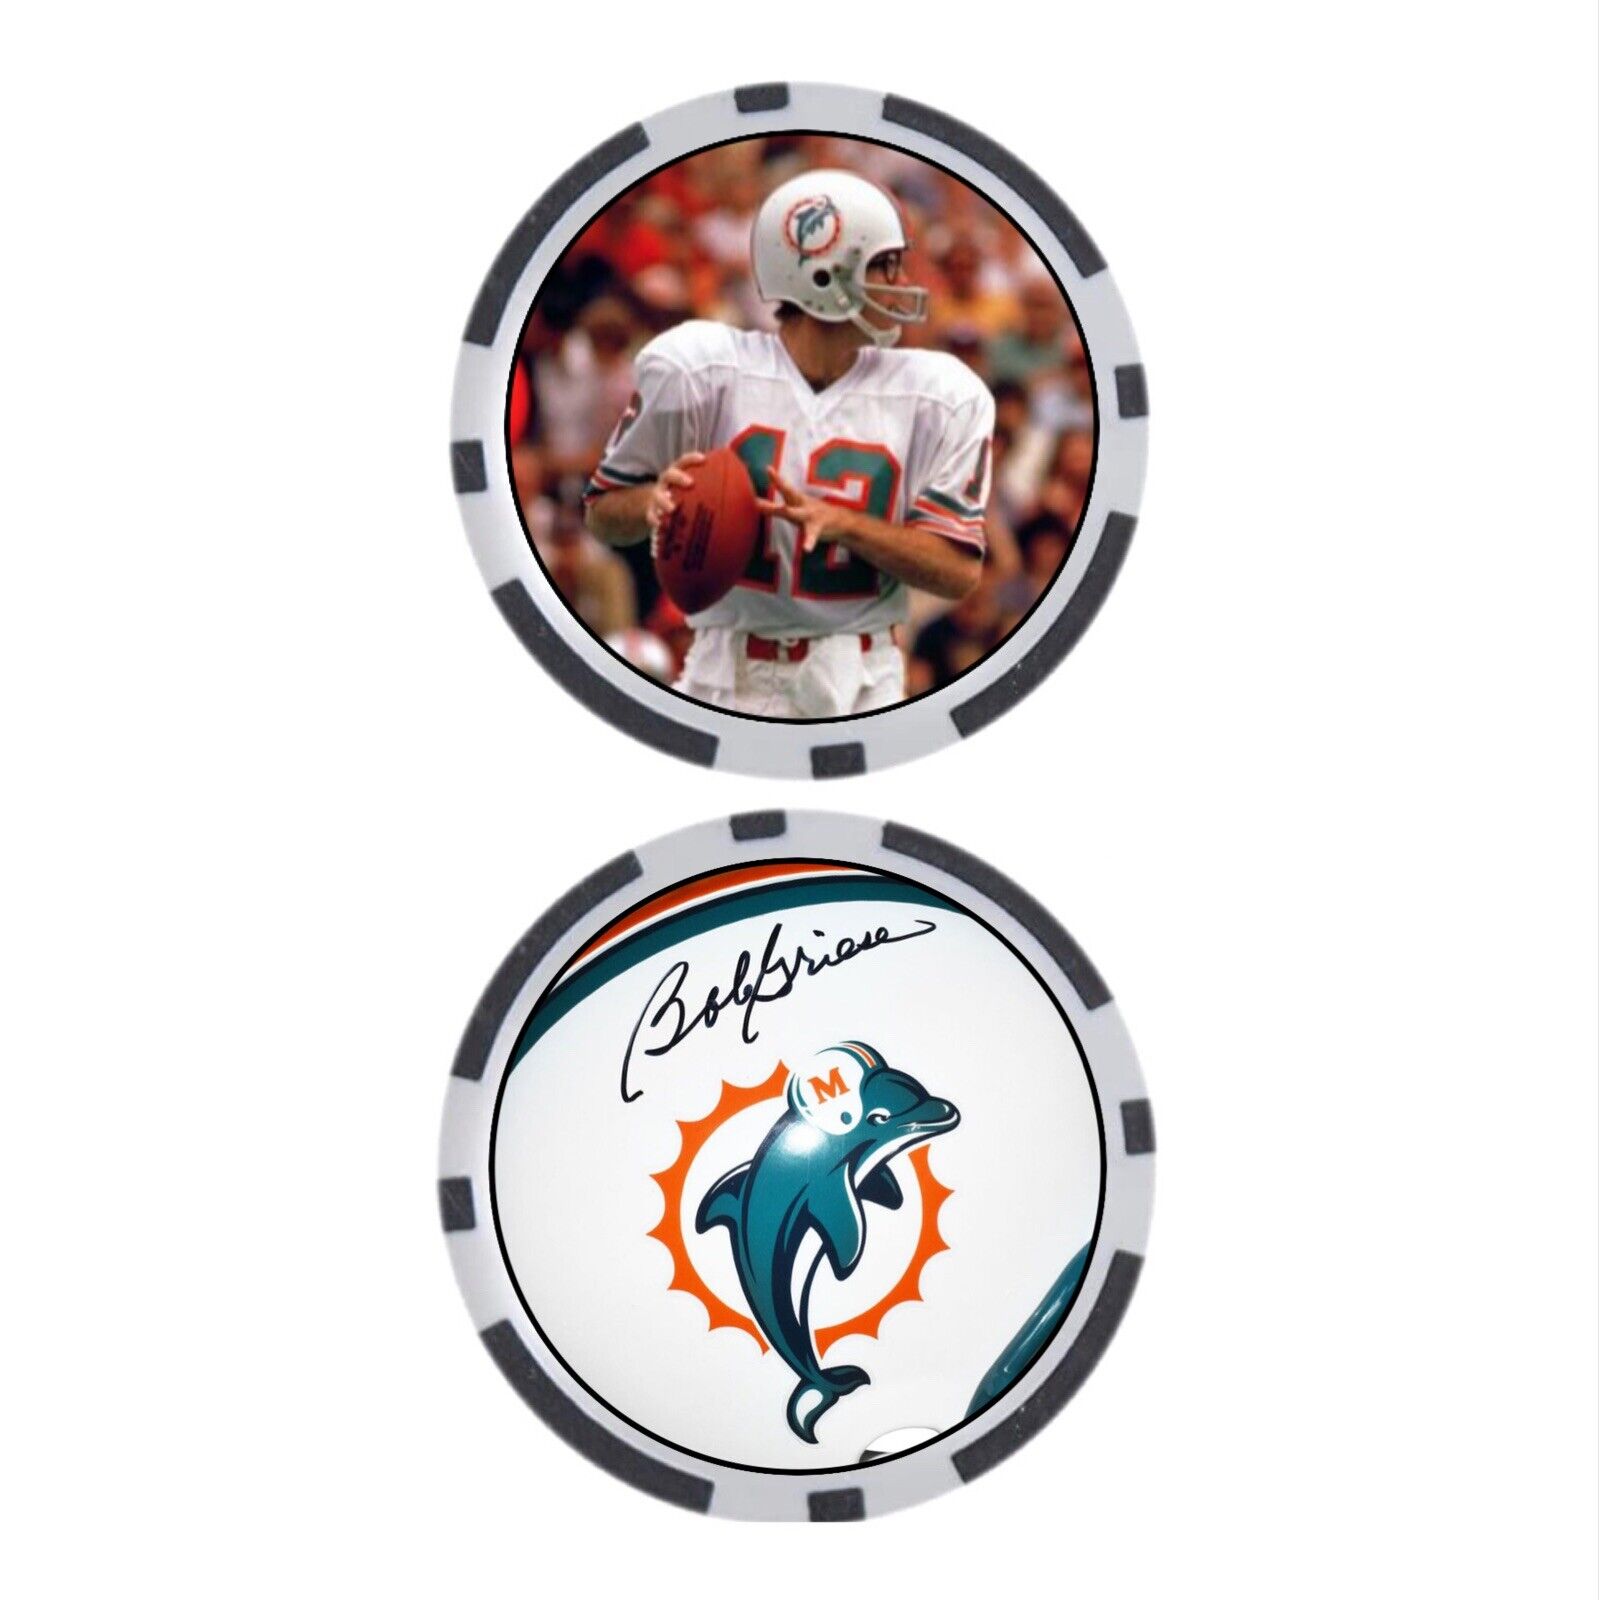 BOB GRIESE - MIAMI DOLPHINS - POKER CHIP - BALL MARKER ***SIGNED***